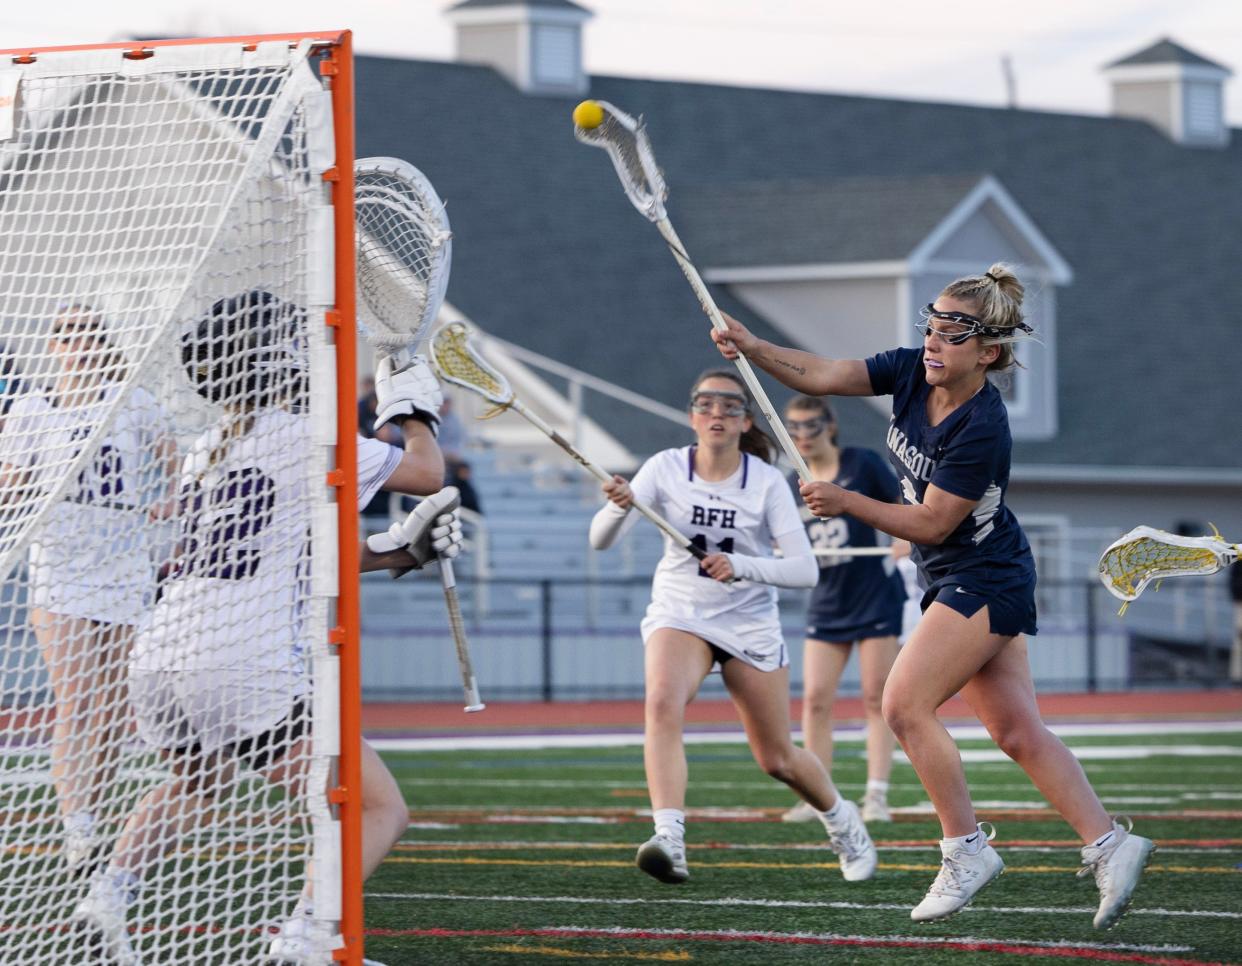 Manasquan’s Belle Porazzo shoots and scores in second half action. Manasquan Girls Lacrosse outlasts Rumson-Fair Haven 10-9 in Rumson on April 23, 2024.